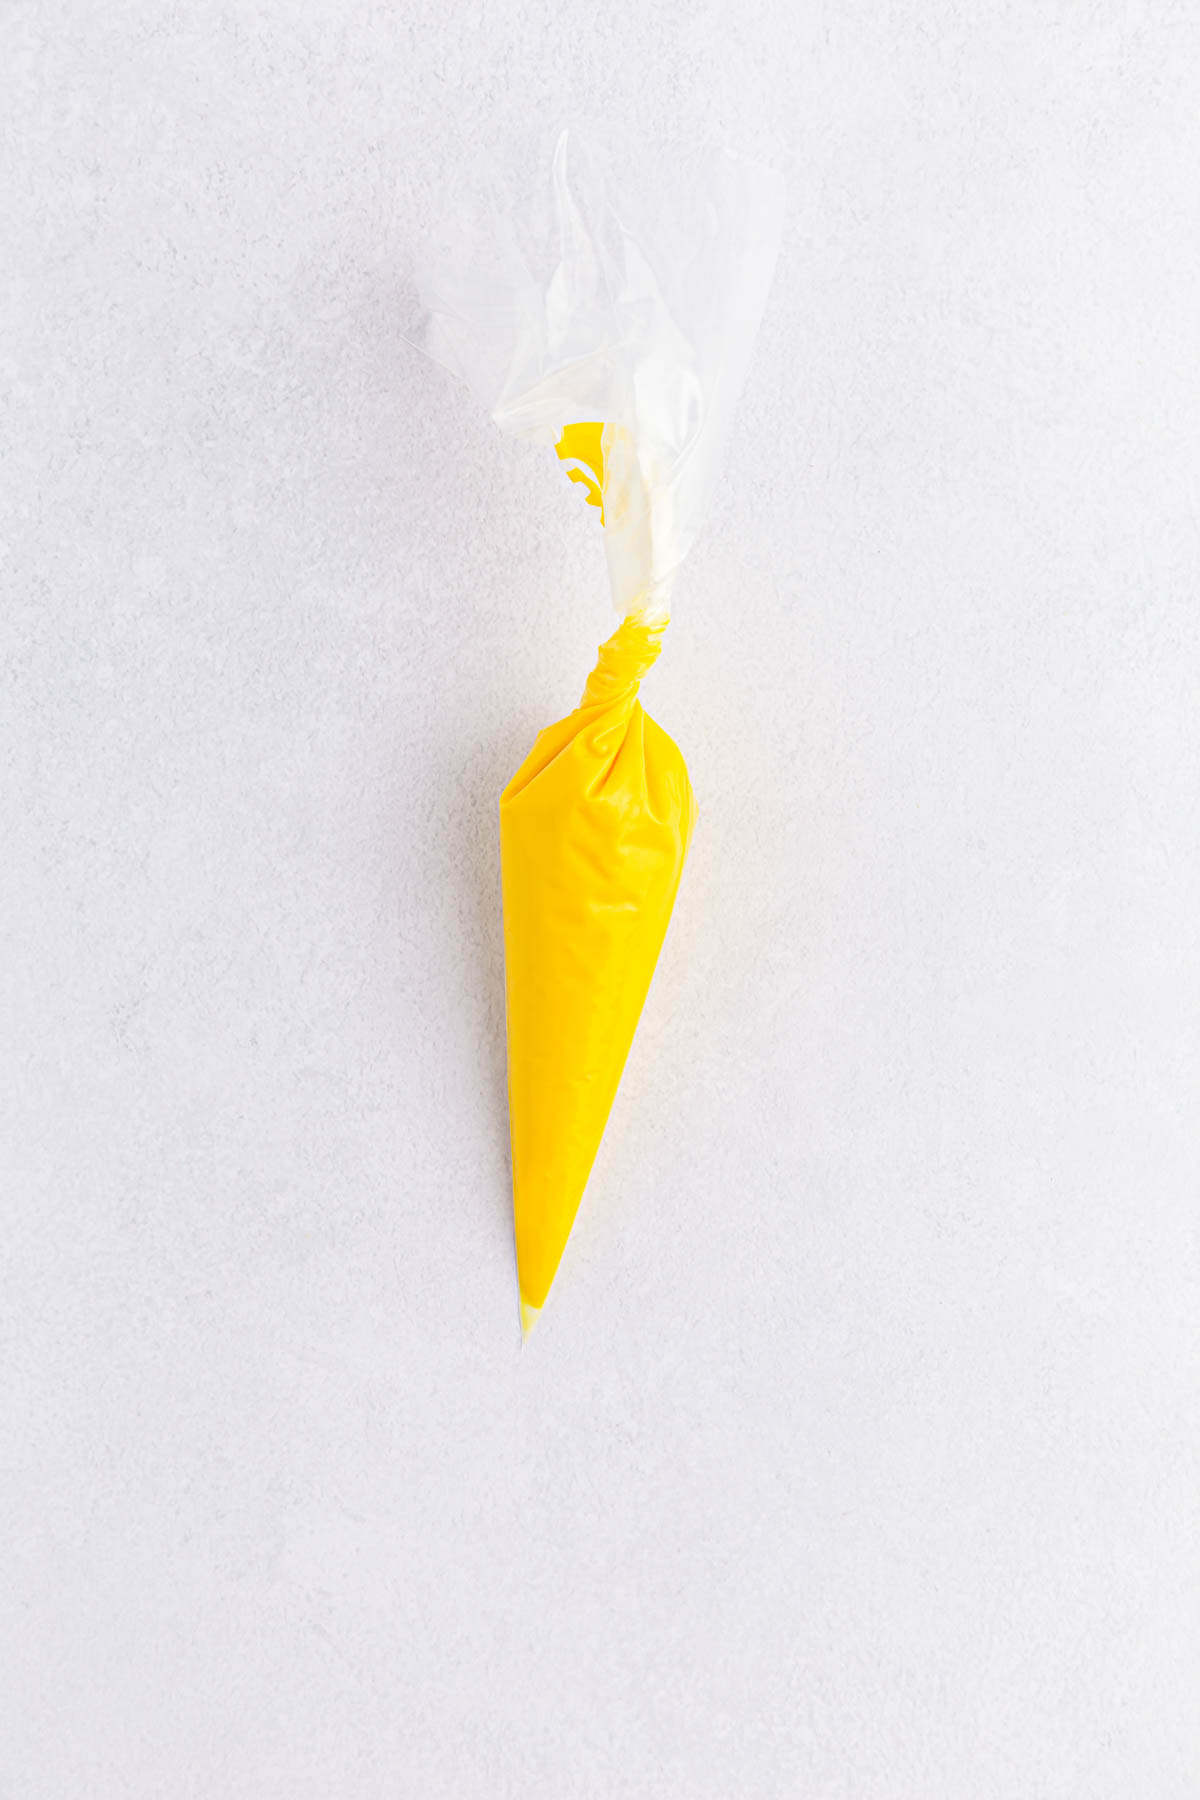 Yellow candy melts in piping bag